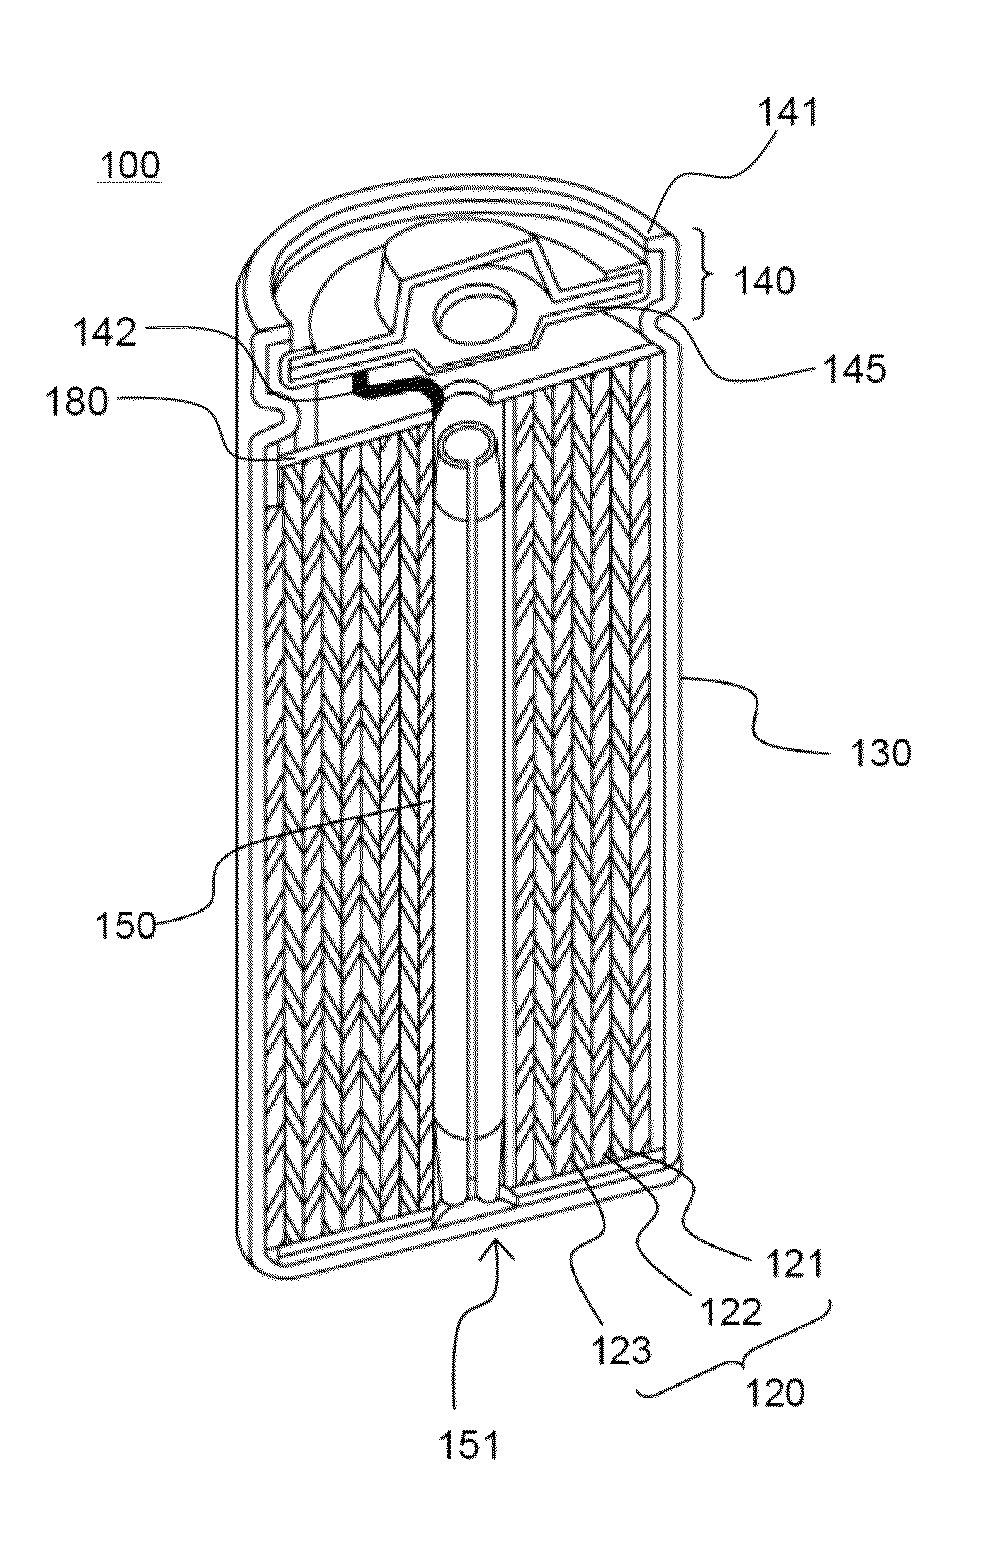 Secondary battery comprising insulator and reinforcing filler